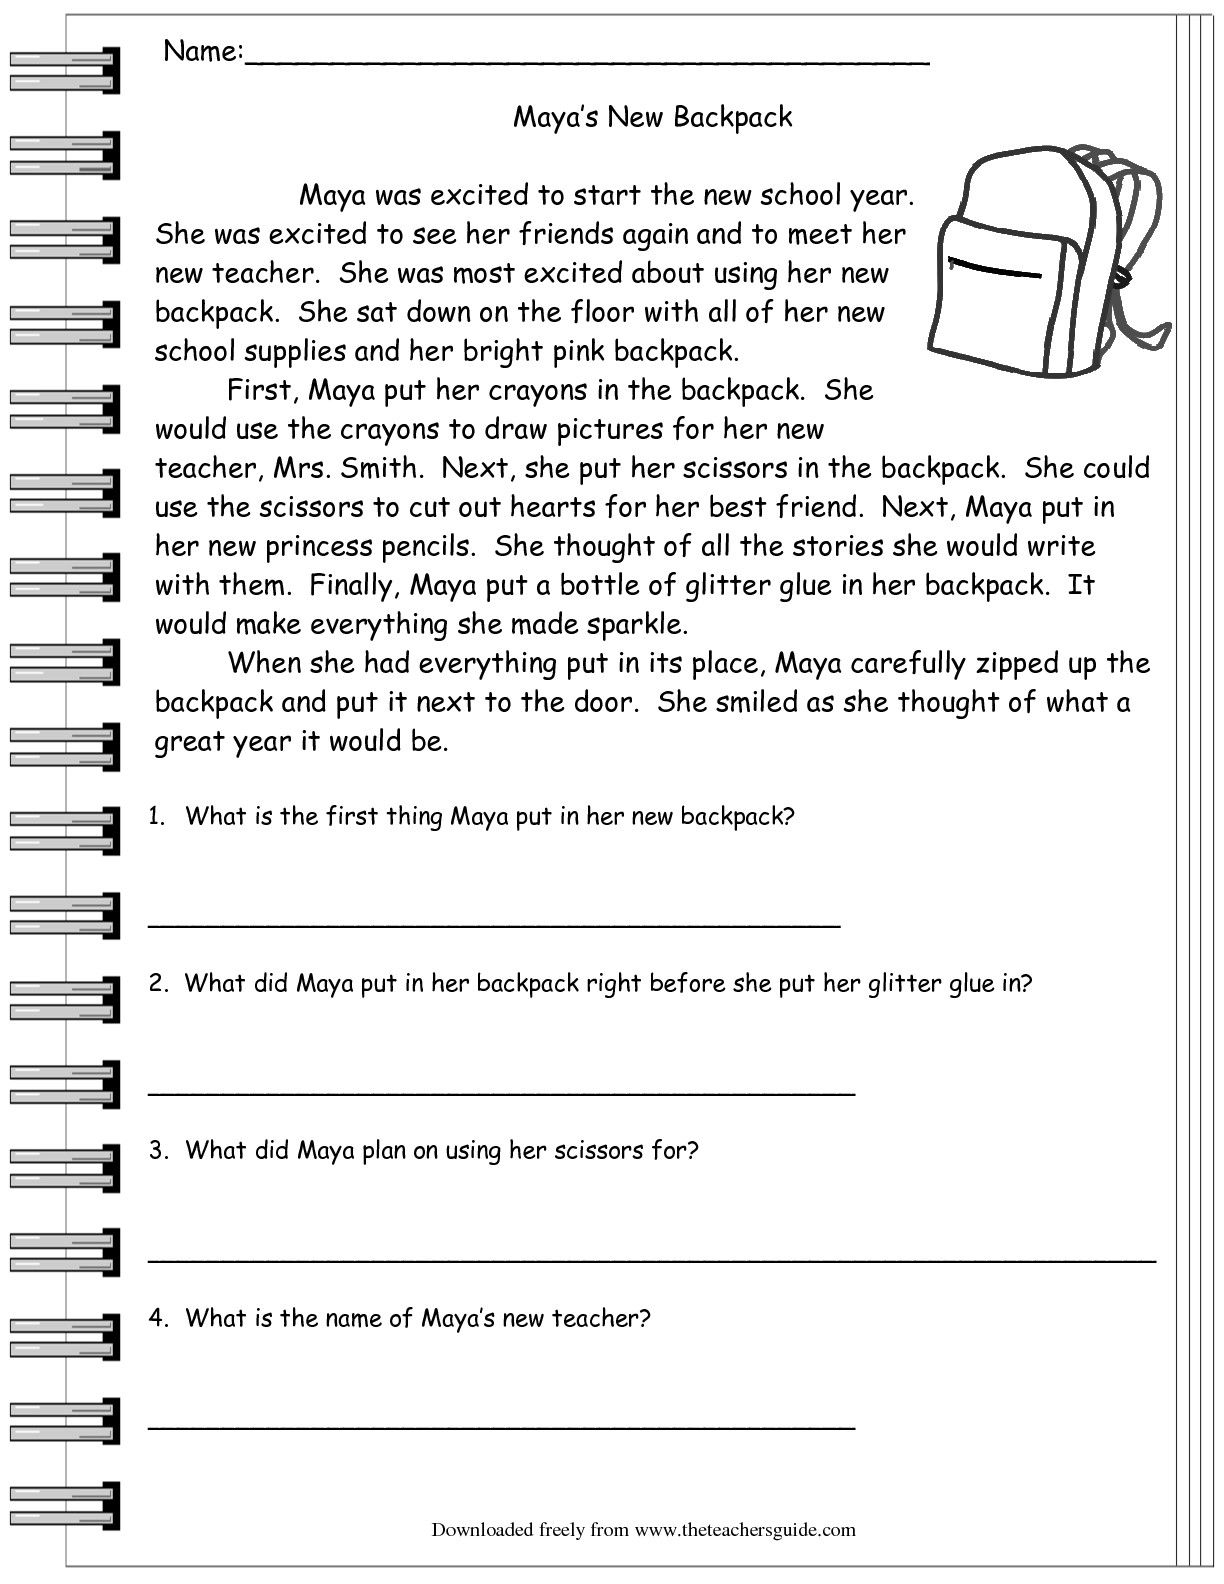 worksheet-for-practicing-elapsed-time-students-use-the-number-line-to-answer-word-problems